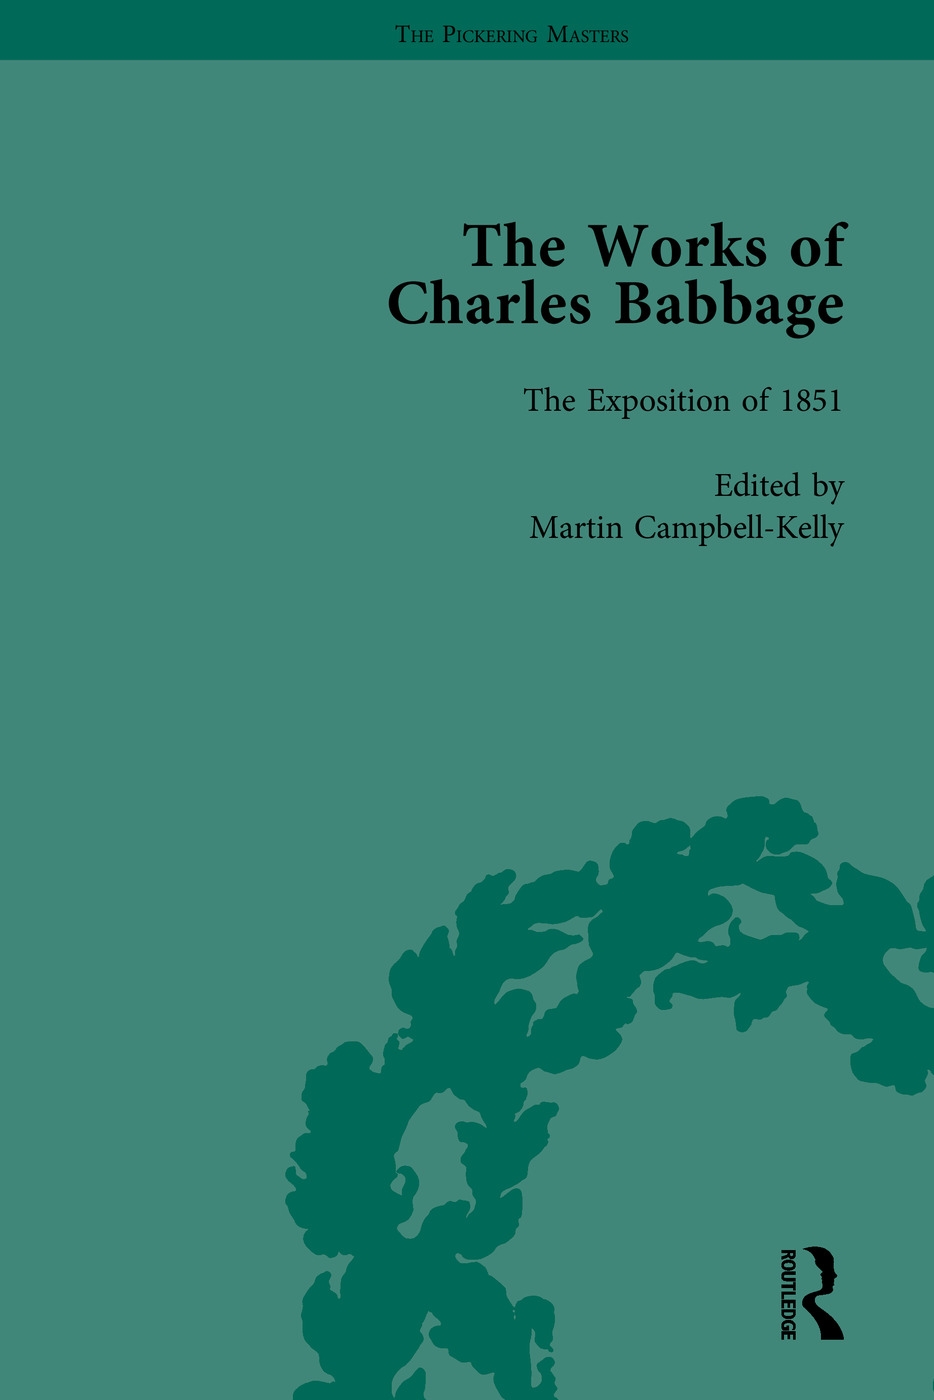 The Works of Charles Babbage